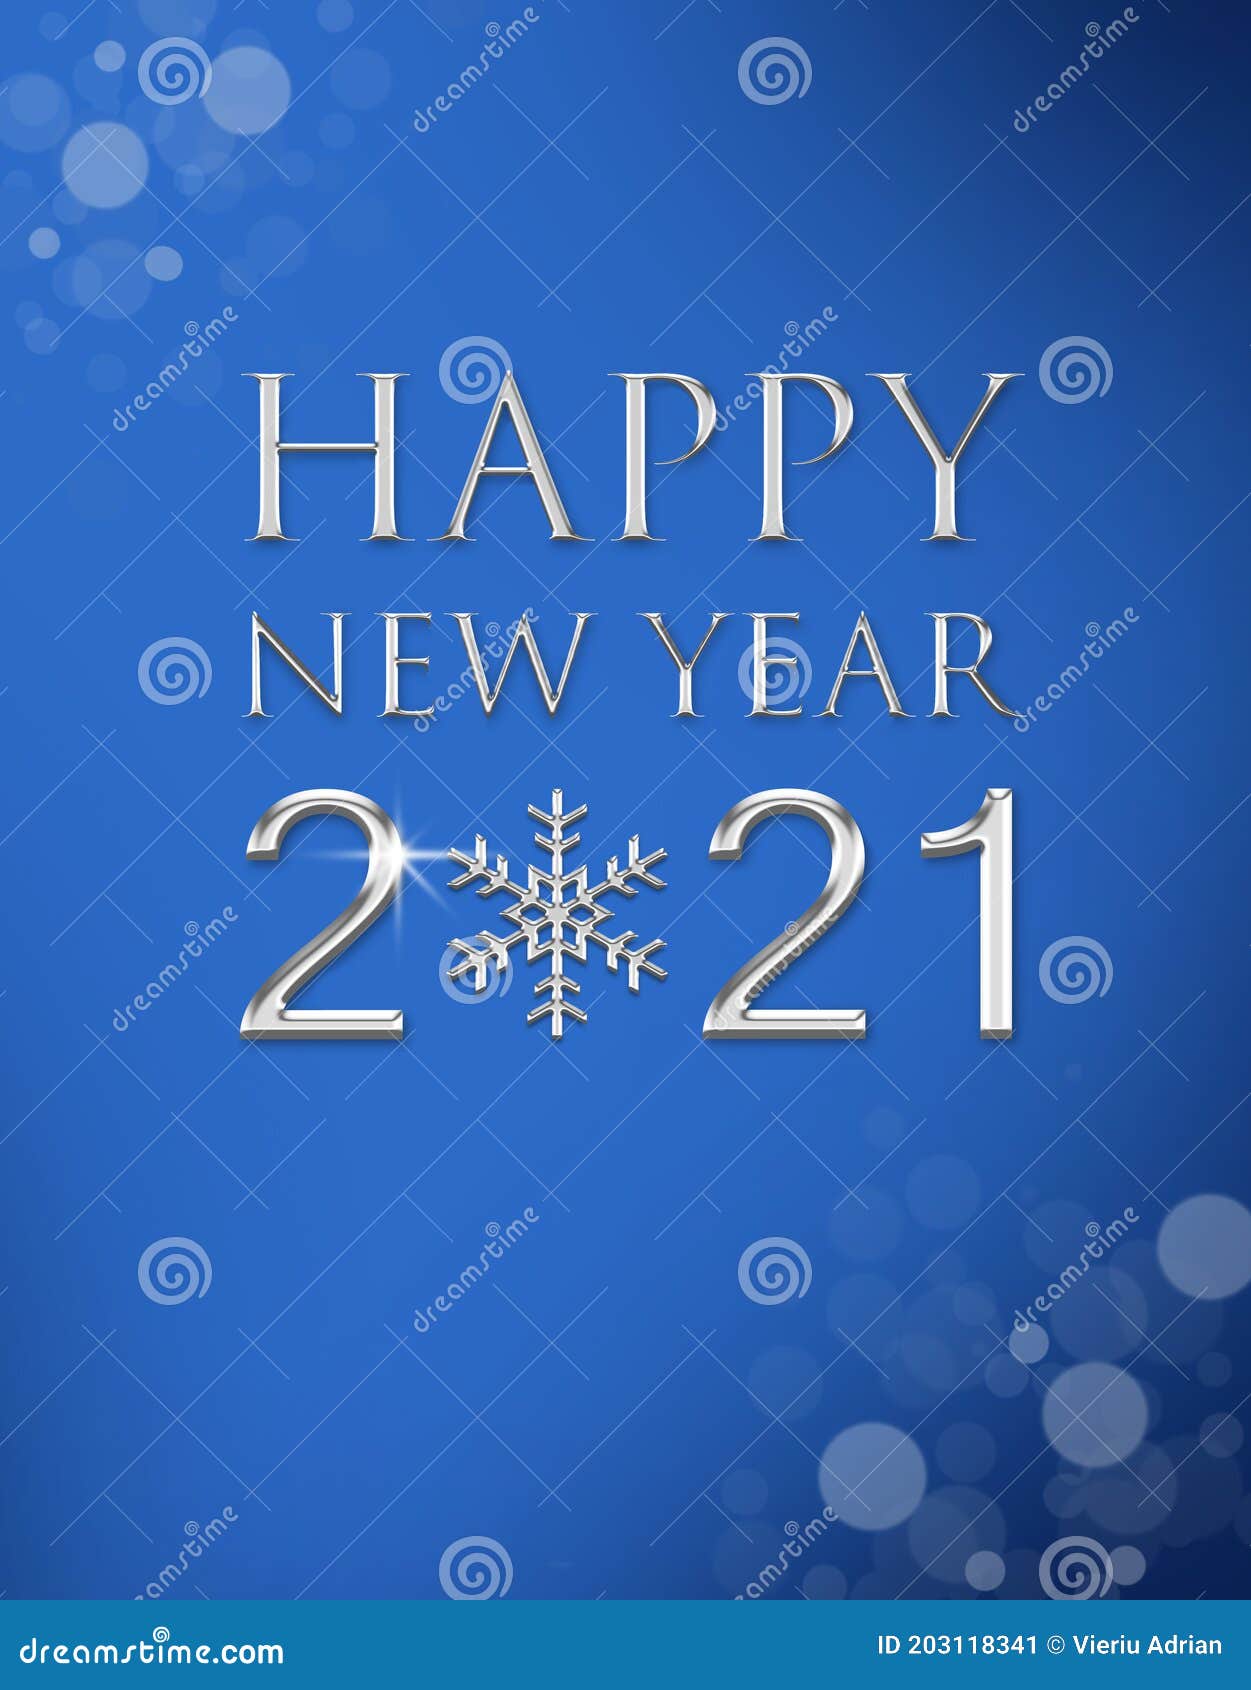 Happy New Year 2021 Holiday Silver Text Design Stock Illustration ...